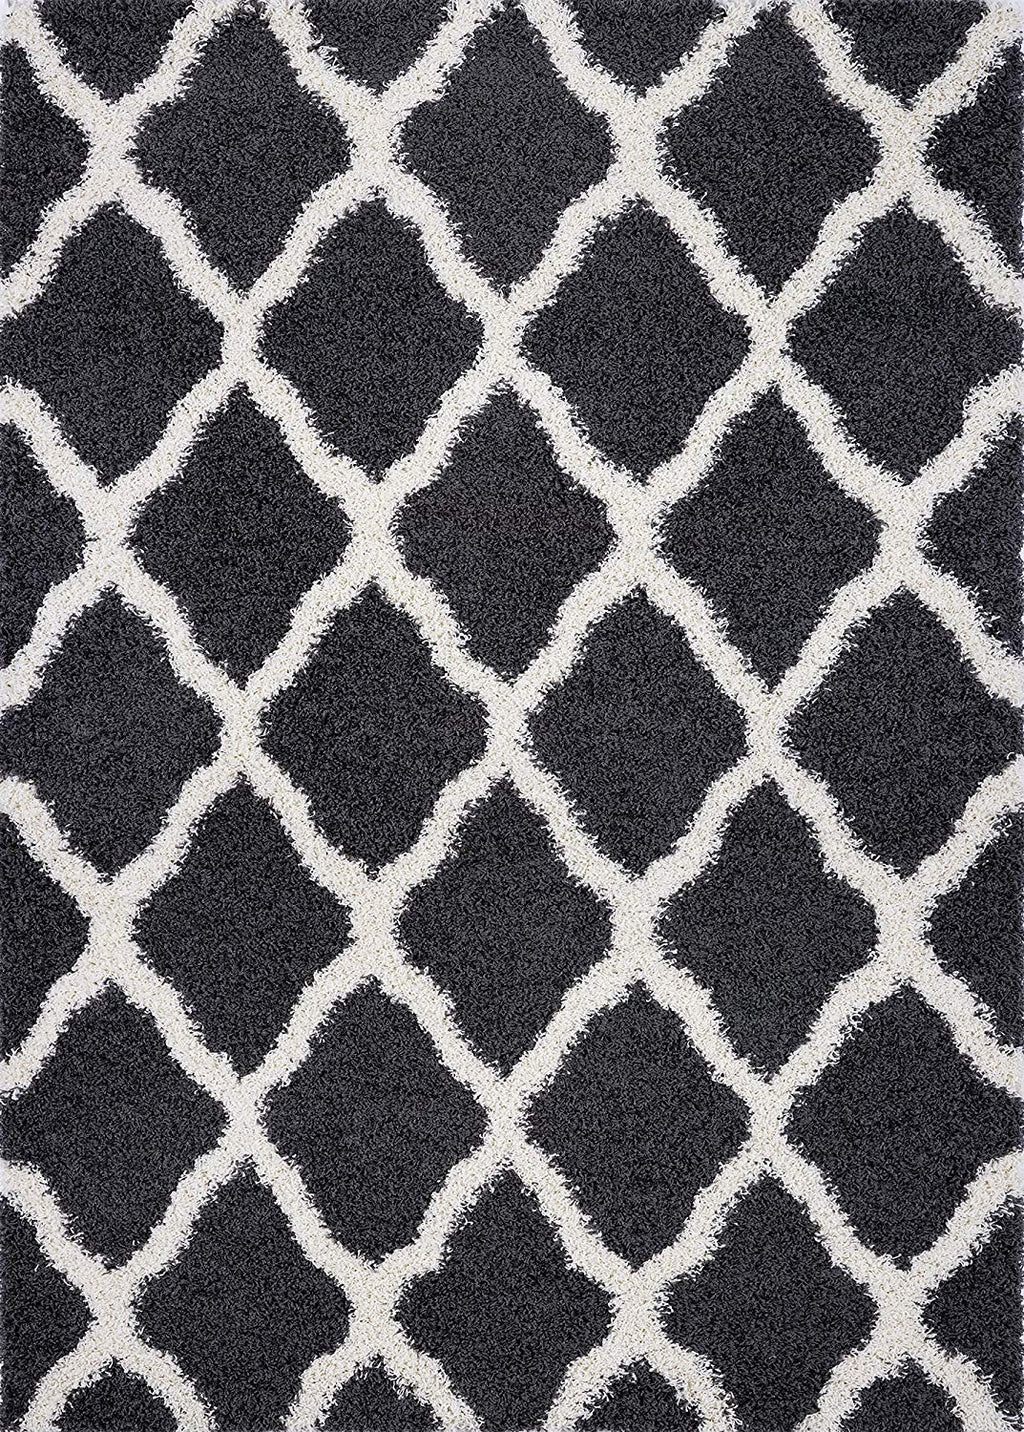 area rugs 8x10 area rug 5x7 5x8 blue luxury bedroom 8x10 clearance living room vintage gray grey traditional bohemian kitchen rugs for bedroom living room abstract rugs area patterns oriental accent rugs contemporary 5'